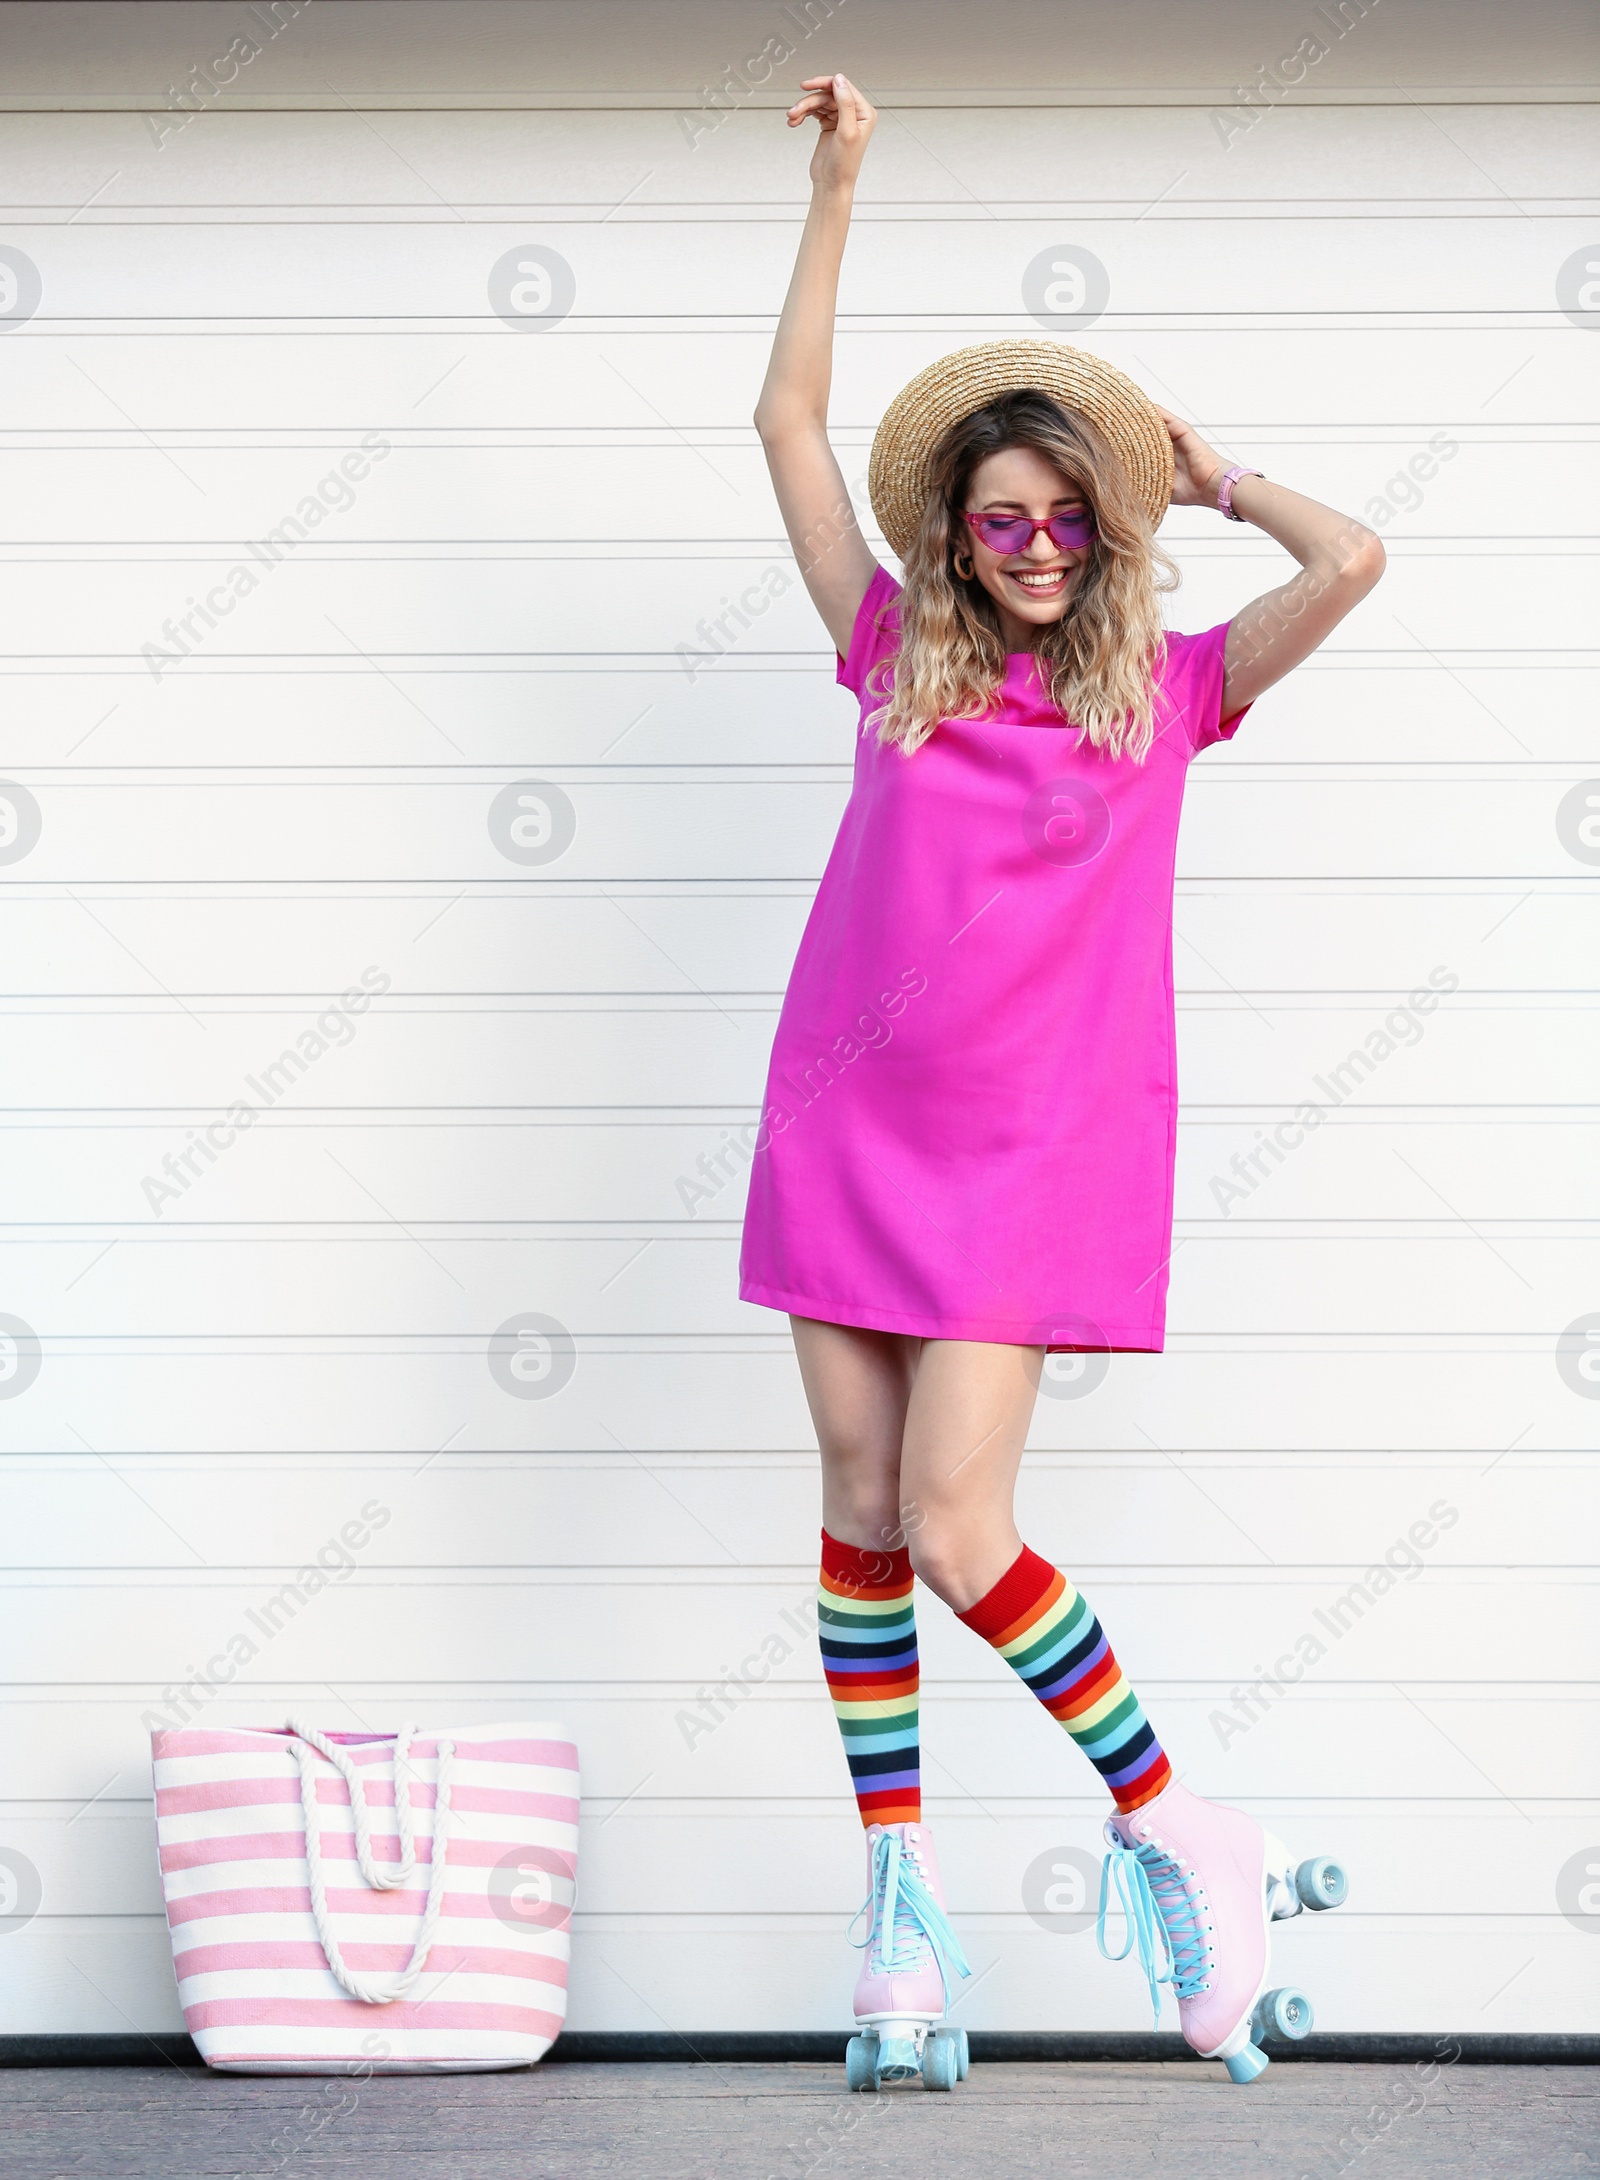 Photo of Happy young woman with retro roller skates near white garage door